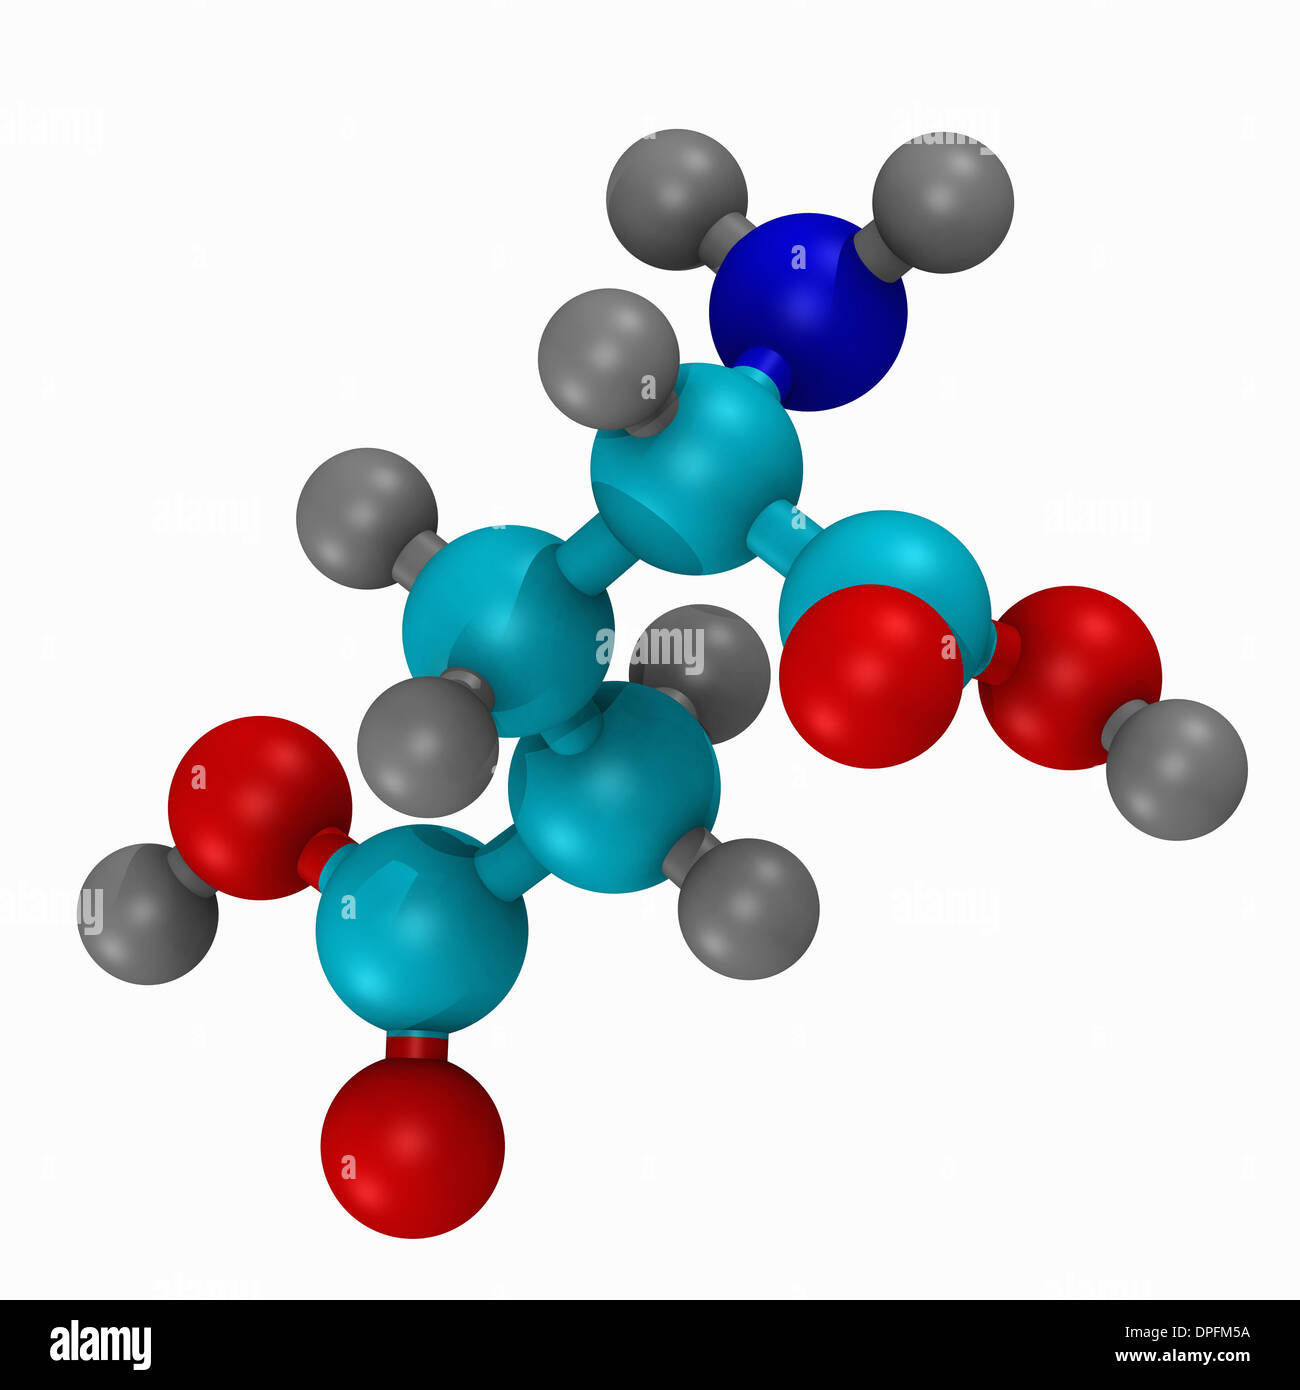 ball and stick model of the amino acid, glutamate Stock Photo